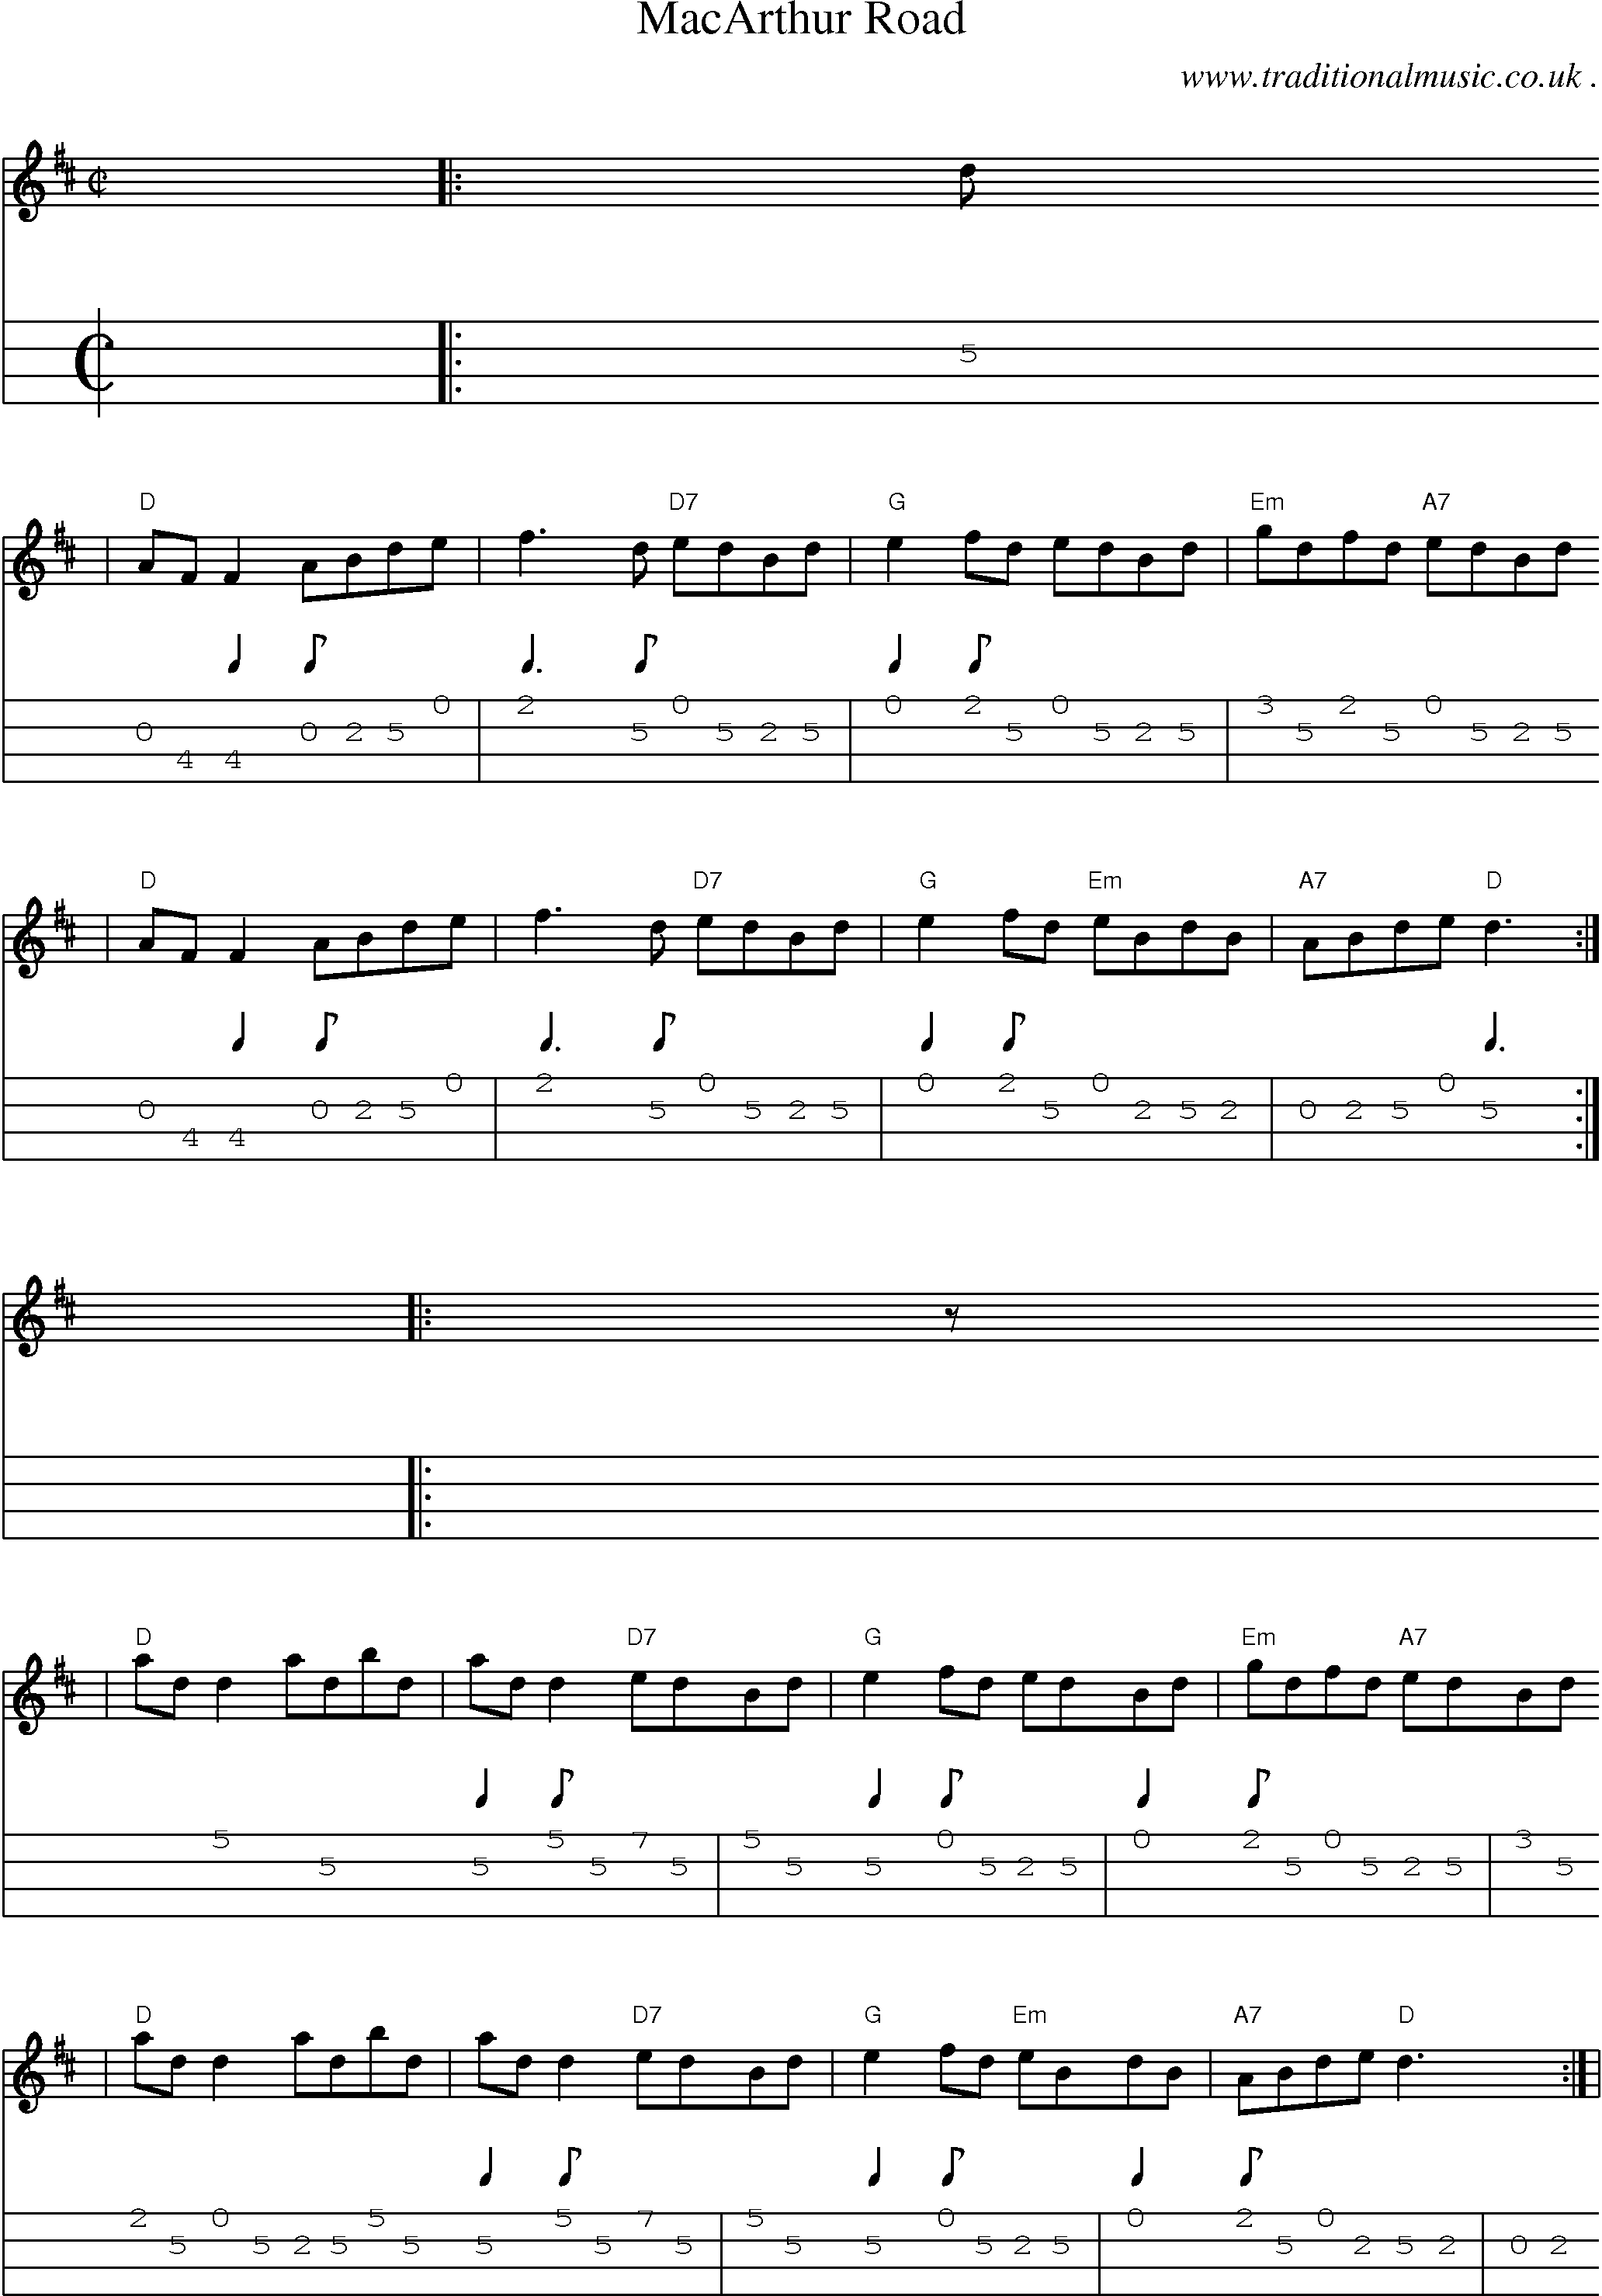 American Old Time Music Scores And Tabs For Mandolin Macarthur Road